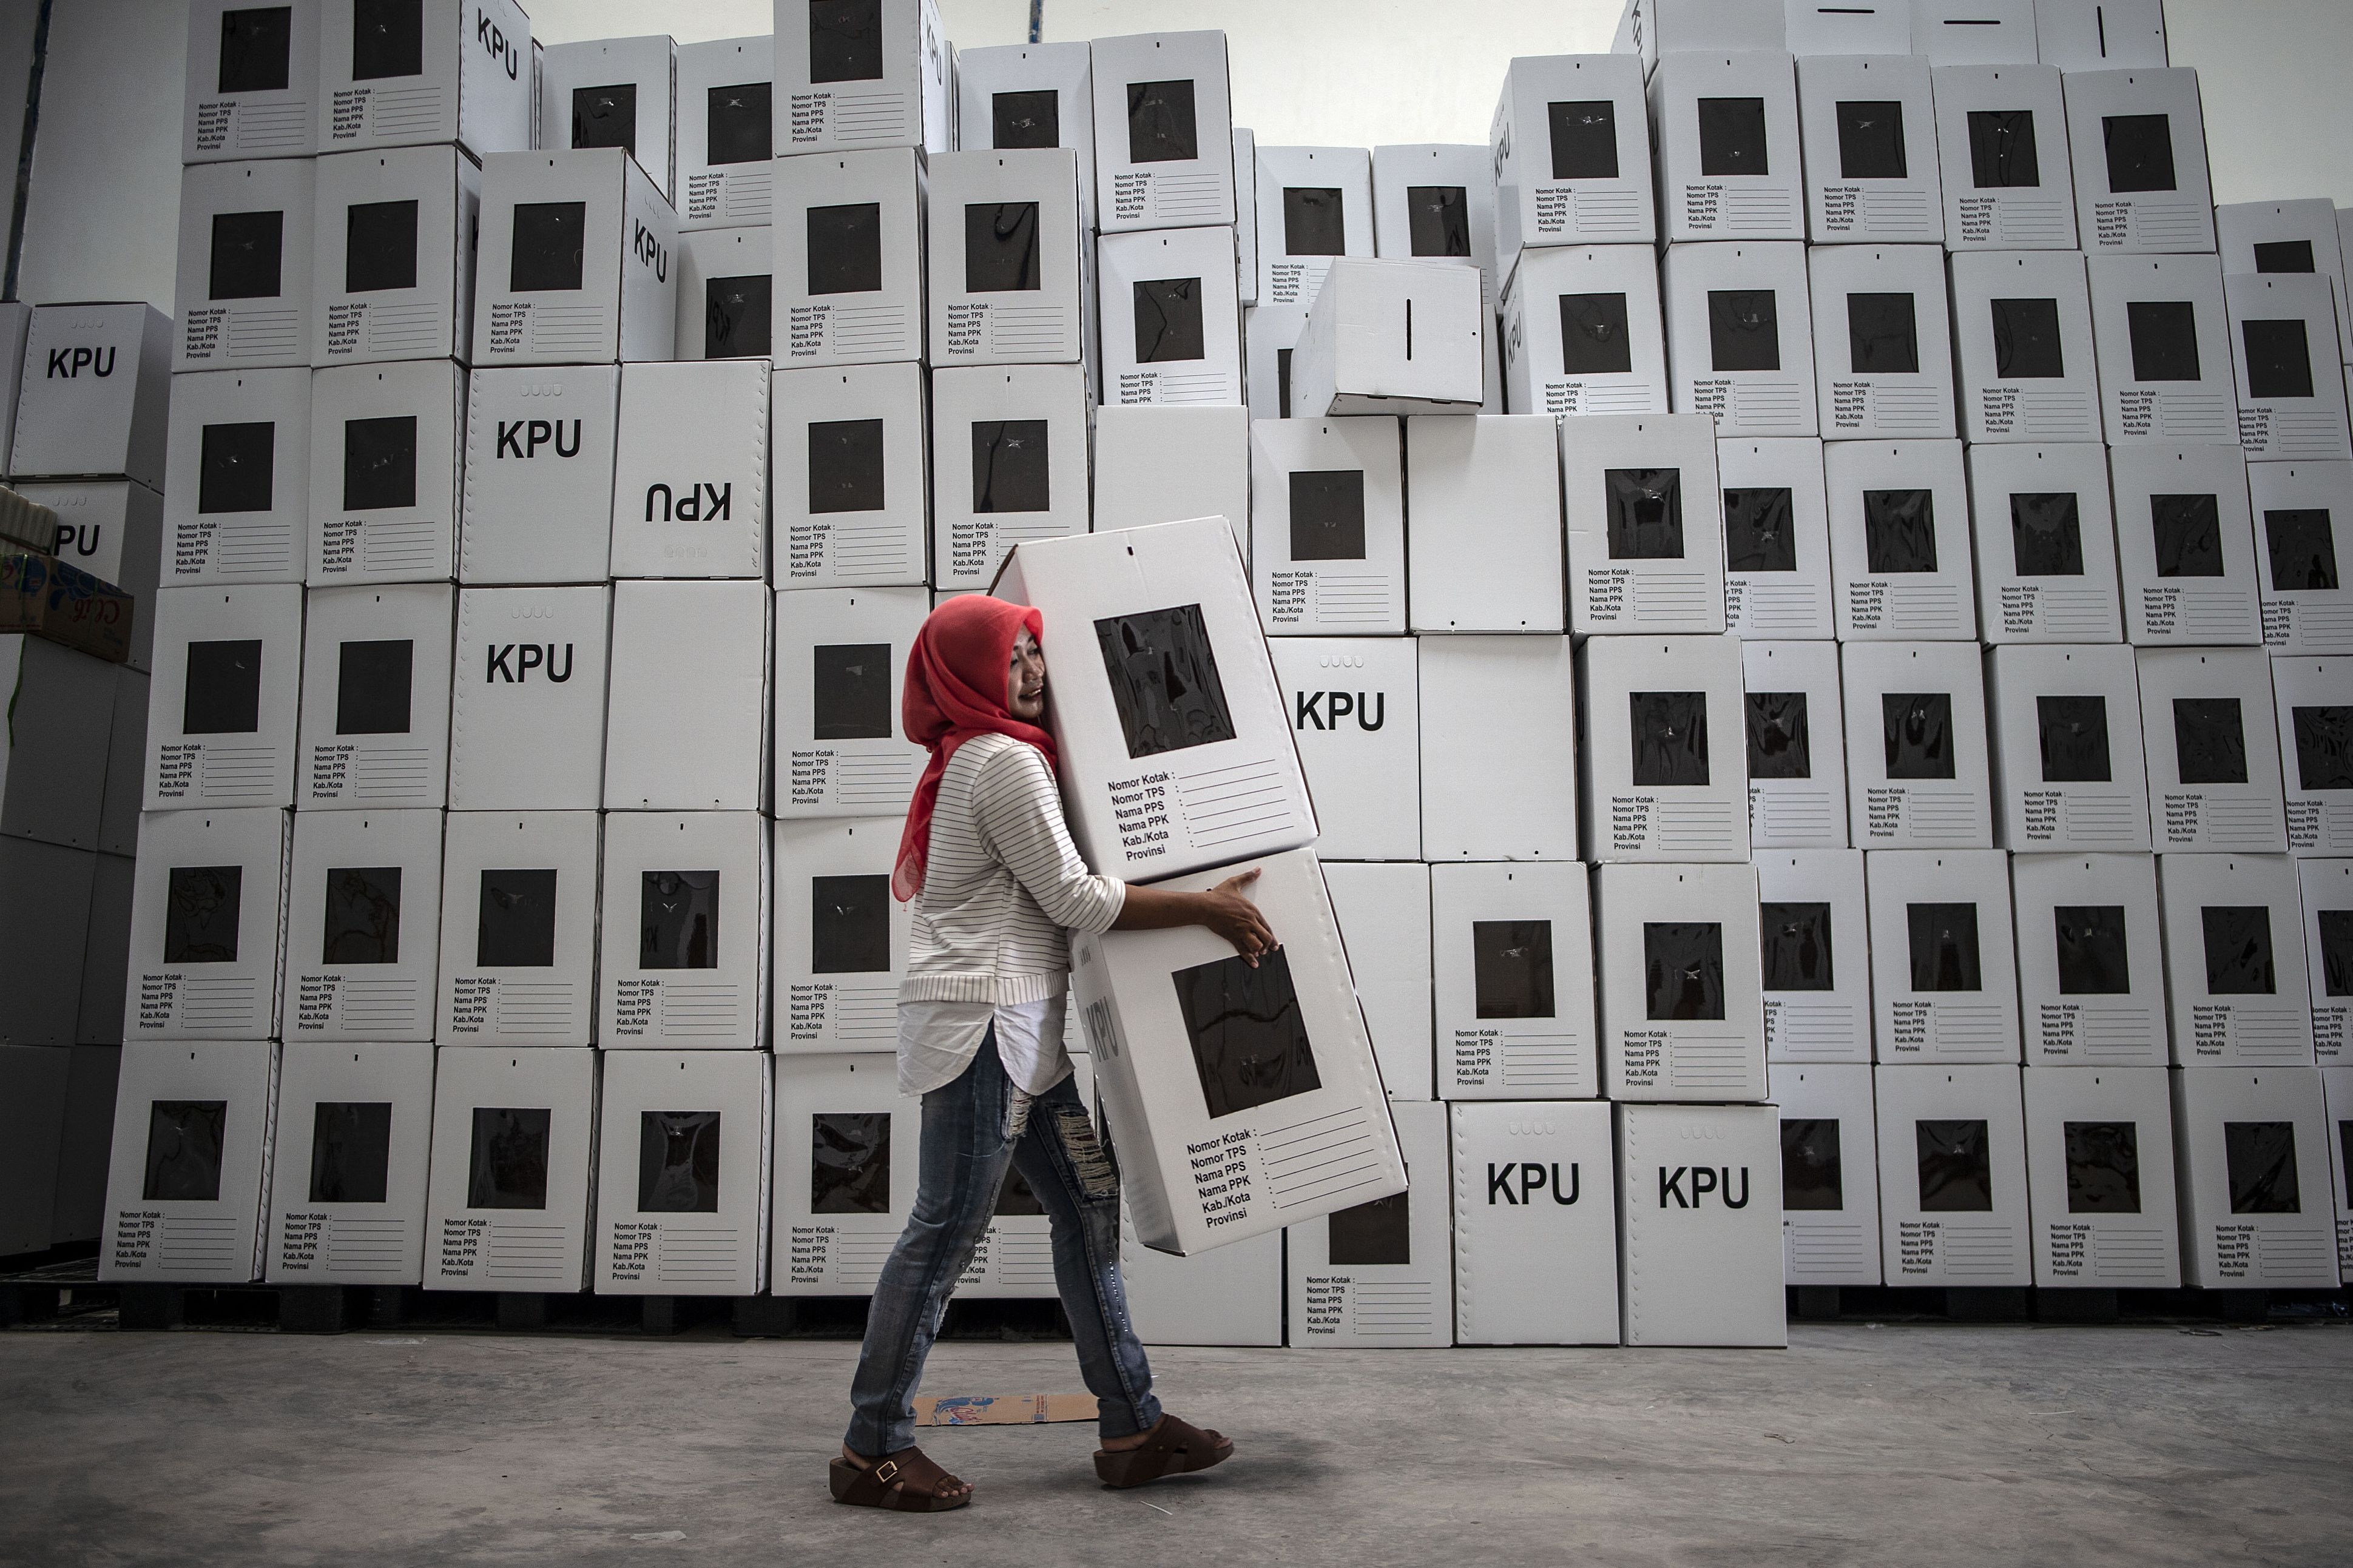 This picture taken on March 18, 2019 shows an Indonesian election commission worker arranging ballot boxes in Surabaya, in preparation for the upcoming April 17 presidential and parliamentary elections. (JUNI KRISWANTO/AFP/Getty Images)